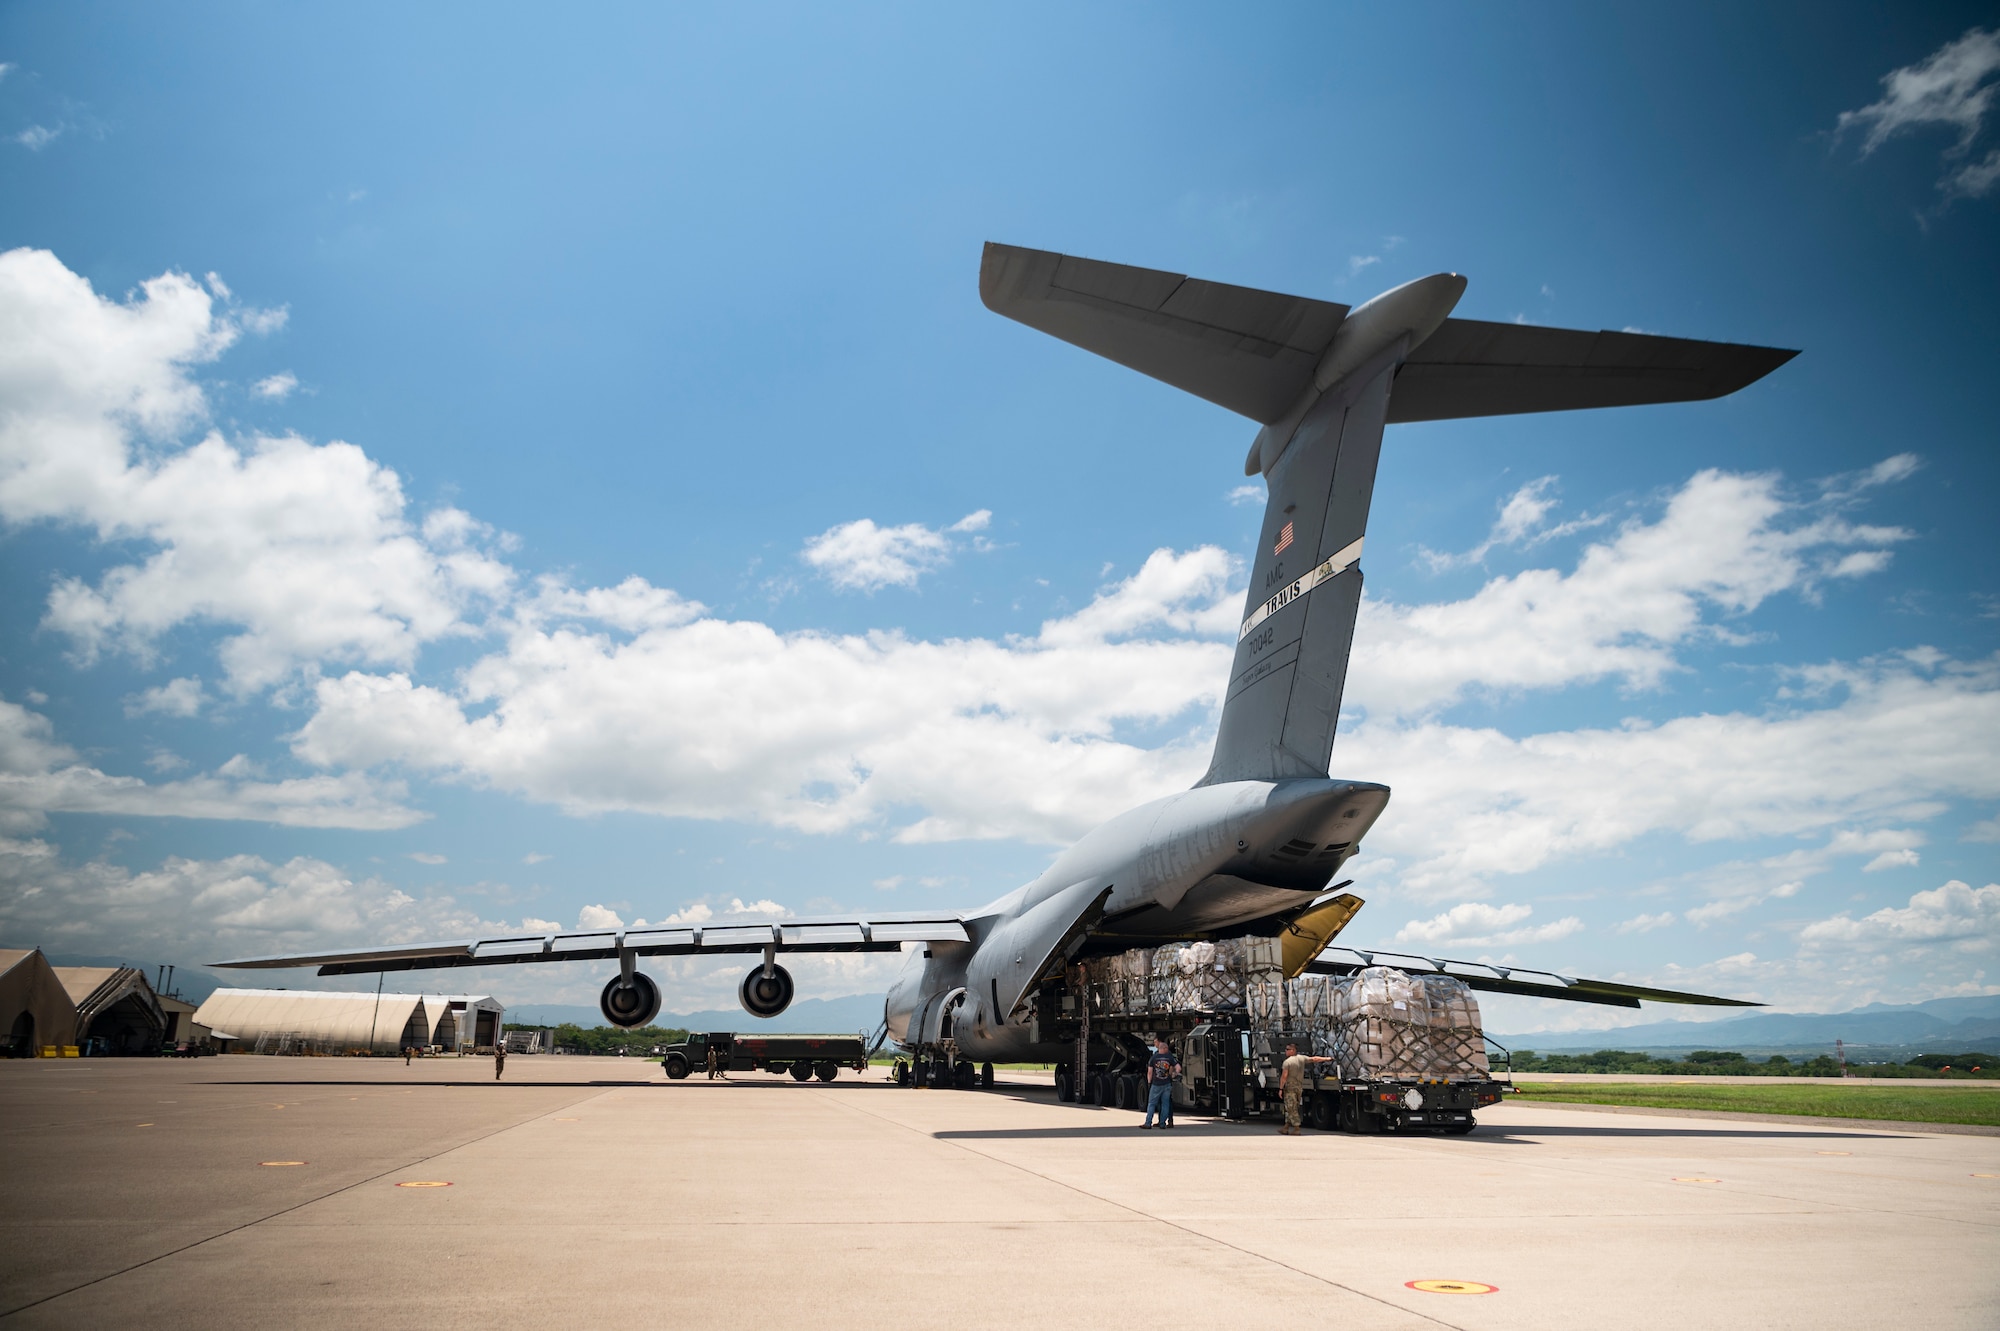 The C-5M delivered over 90,000 pounds of humanitarian aid through the Denton Program. The Denton Program allows private U.S. citizens and private organizations to transport humanitarian goods to approved countries in need.